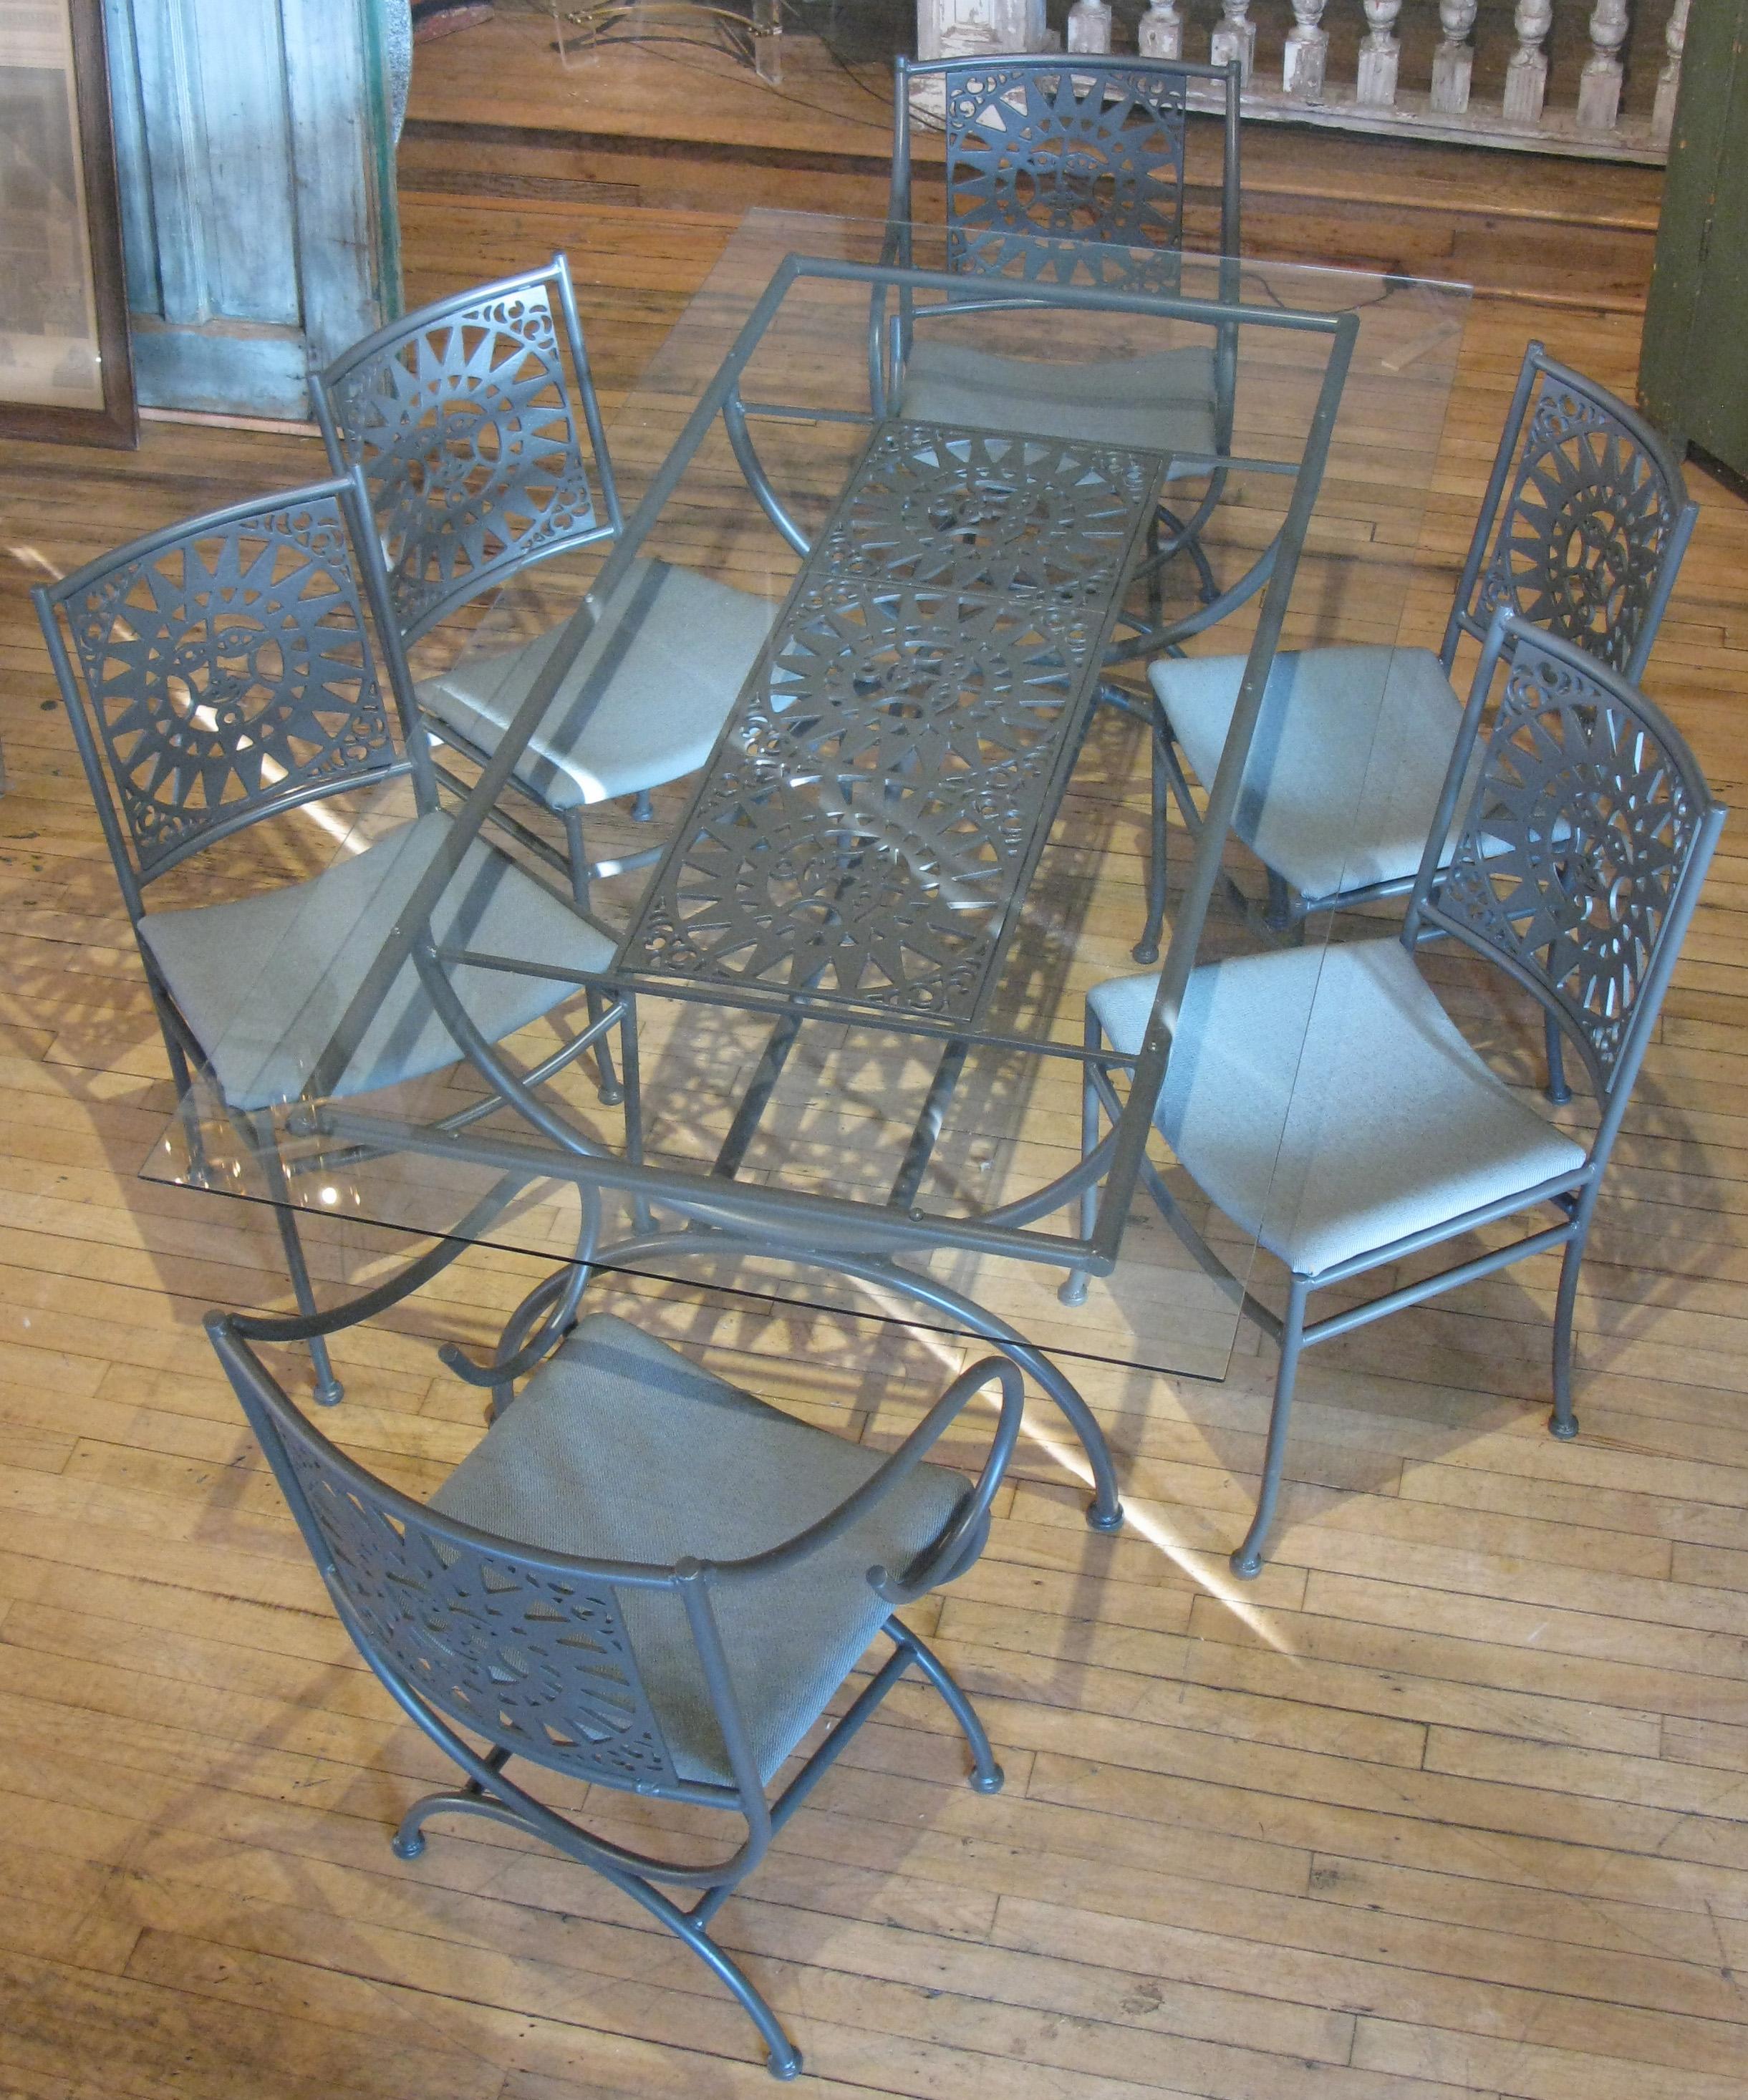 A vintage 1960s dining set designed by Arthur Umanoff, with frames in aluminum and seat backs and the table base with wrought iron panels depicting the Mayan Sun. Beautiful set just refinished in greige, with seats recovered in slate gray. The table